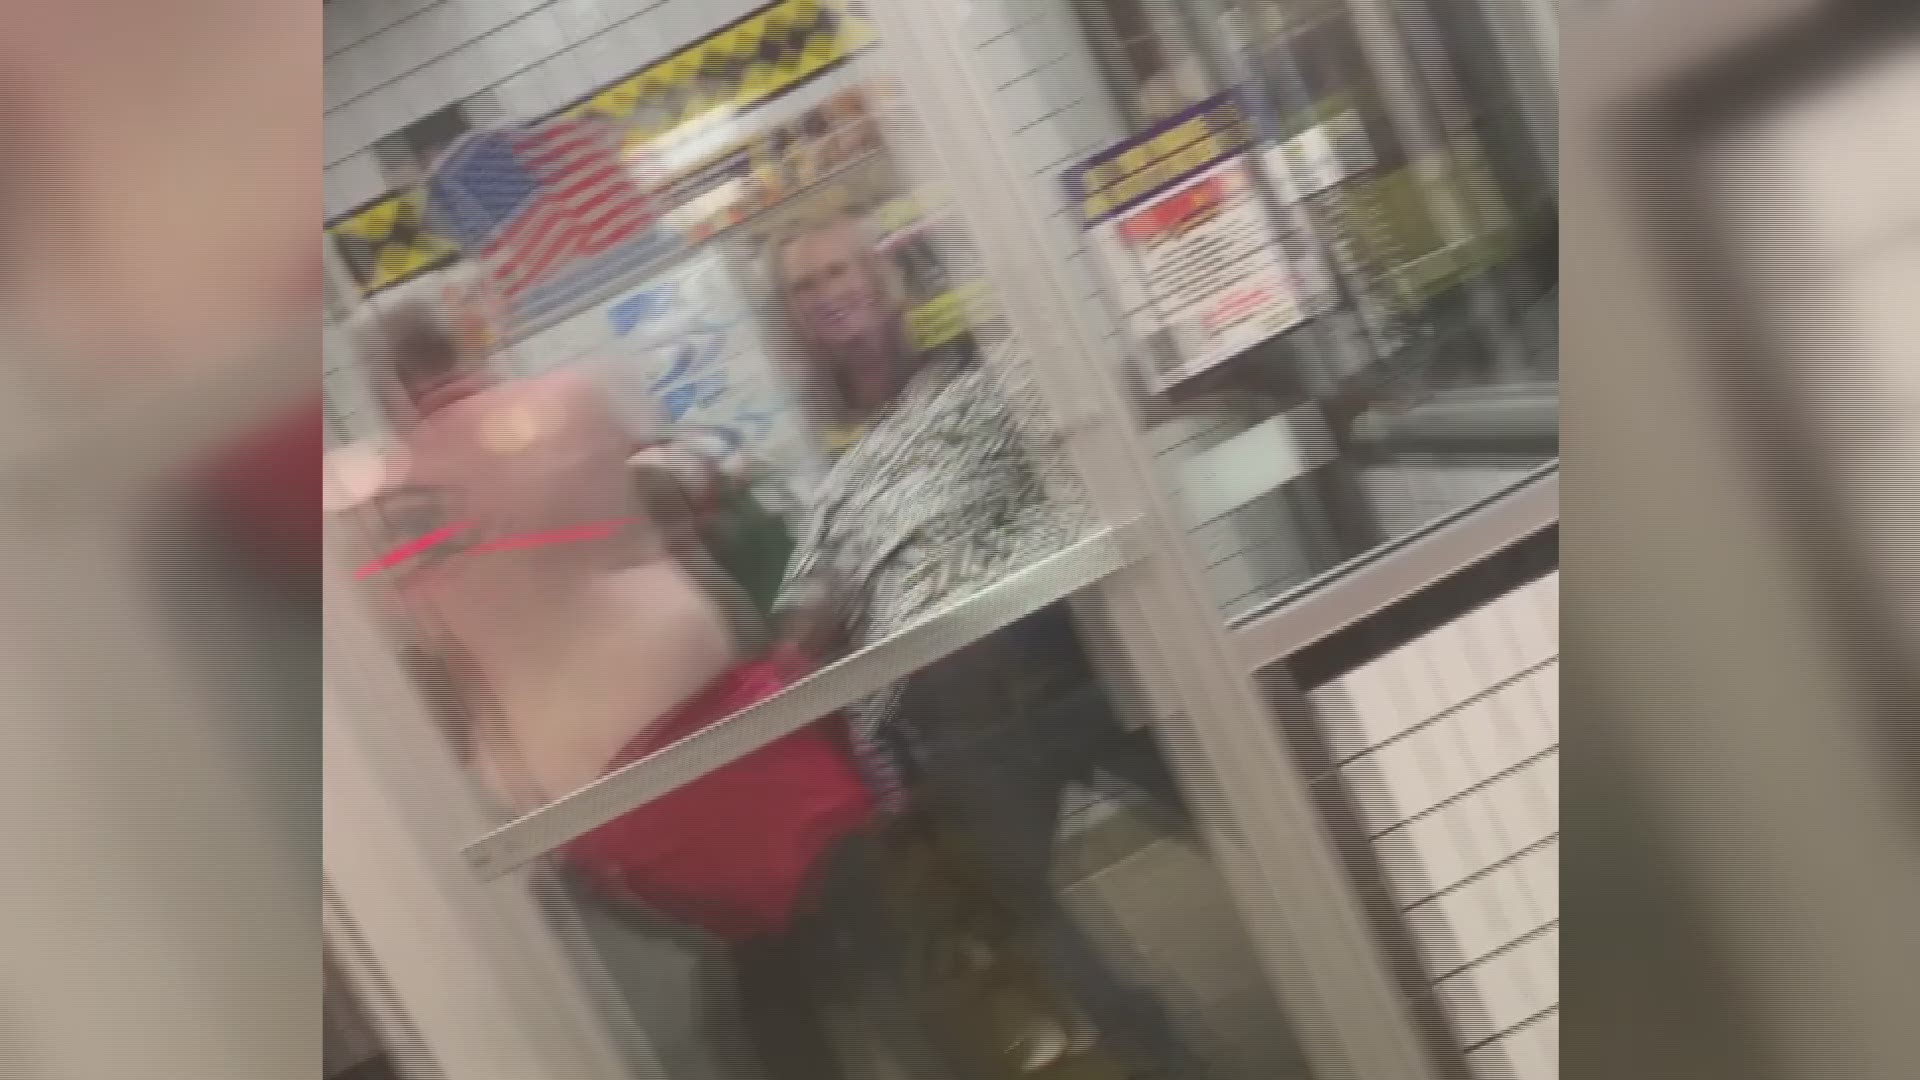 Police are looking for two men who attacked a man at a Snellville Waffle House.